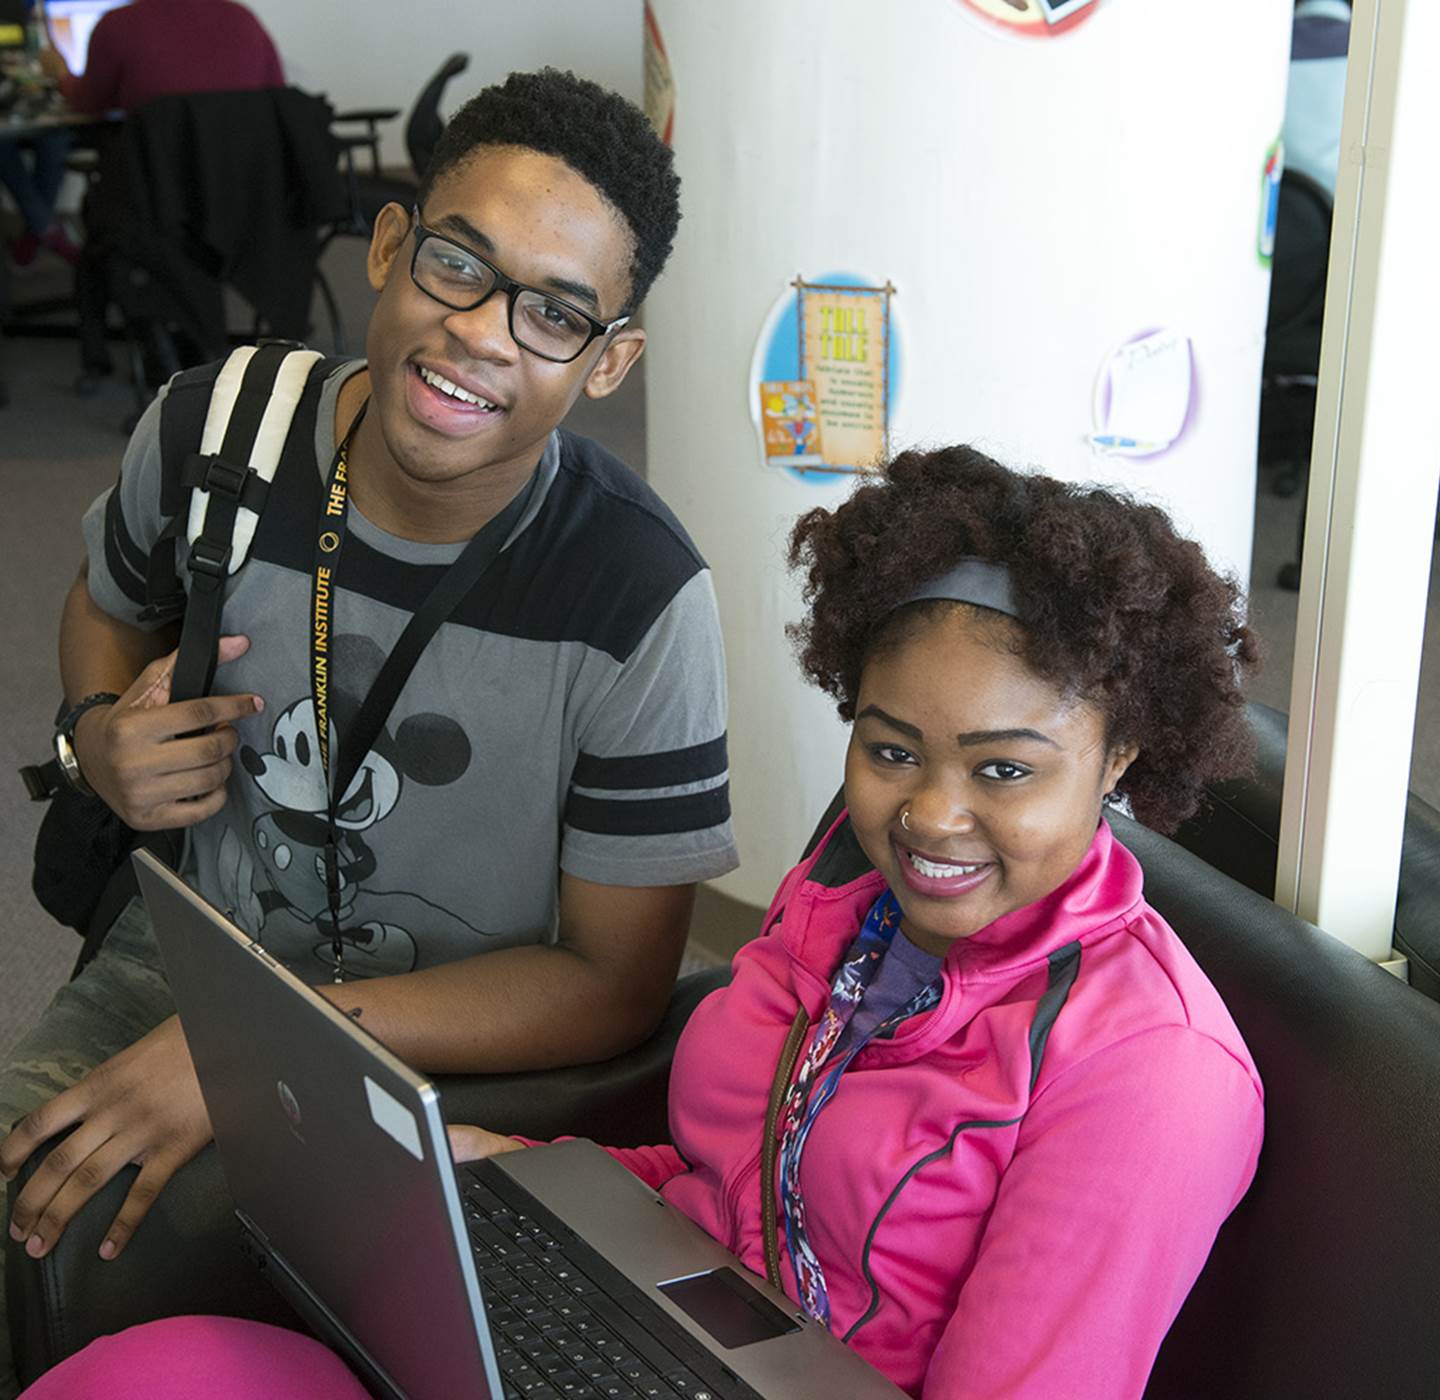 Two students posing behind a laptop.